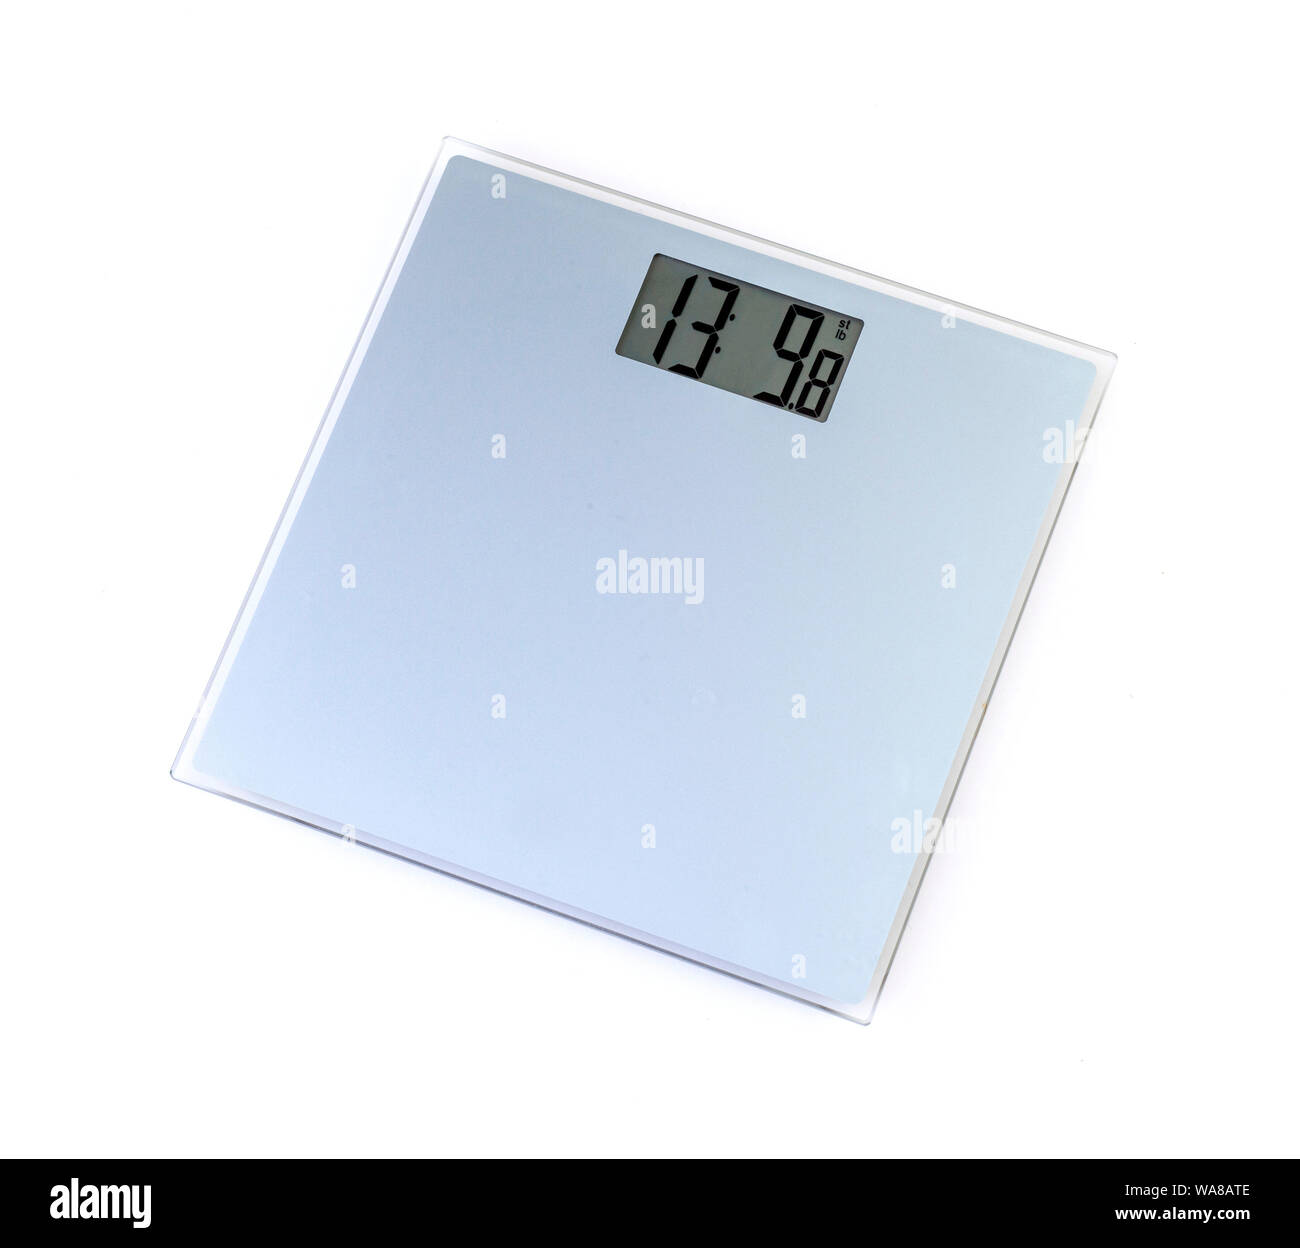 29,600+ Digital Weighing Scale Stock Photos, Pictures & Royalty